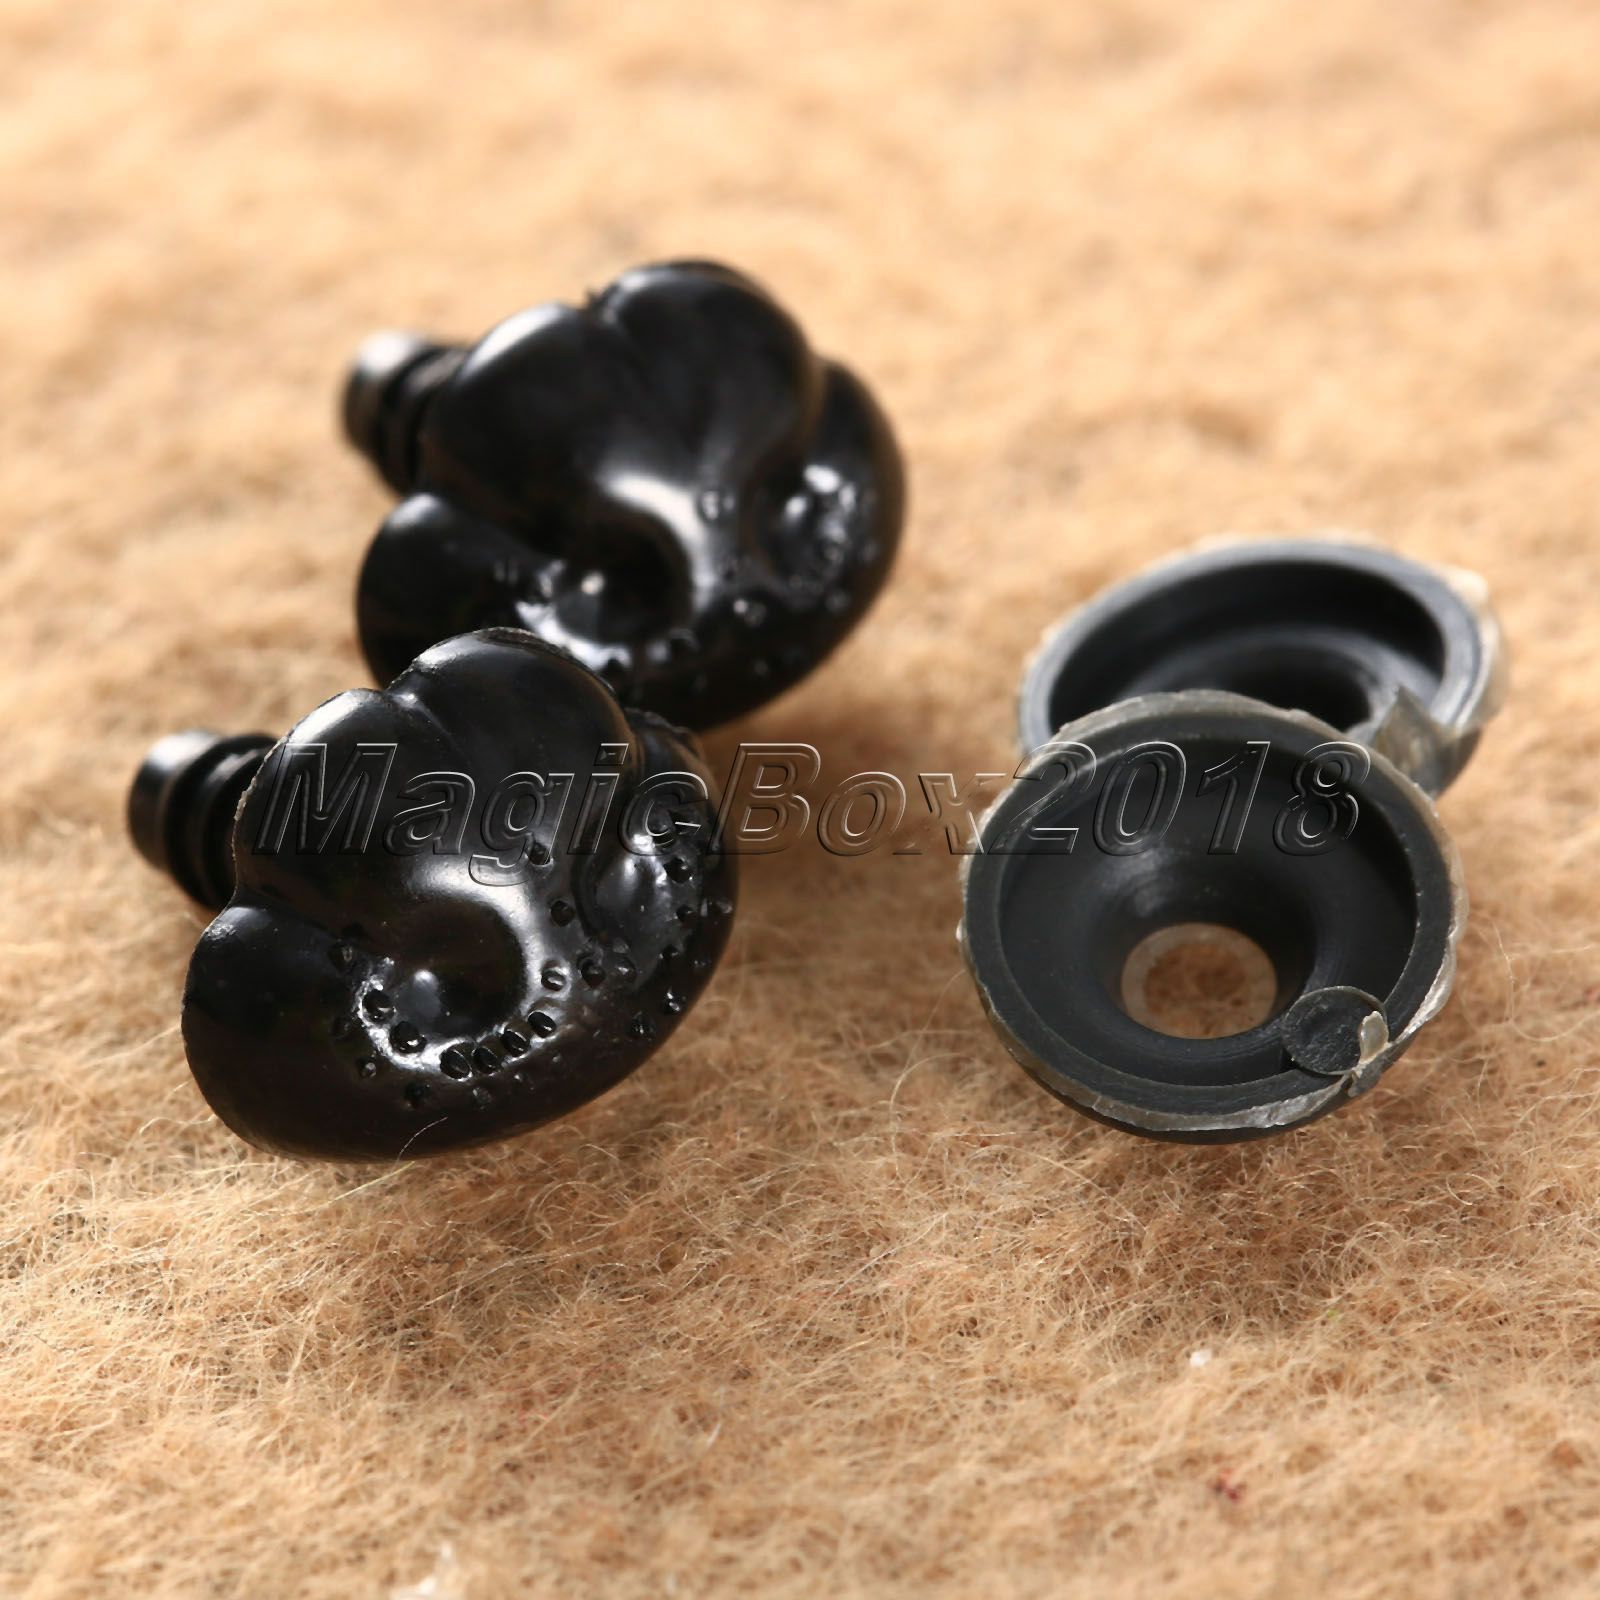 100pcs Black Plastic Noses For Teddy Bear Puppy Doll Stuffed Animal Toy Making